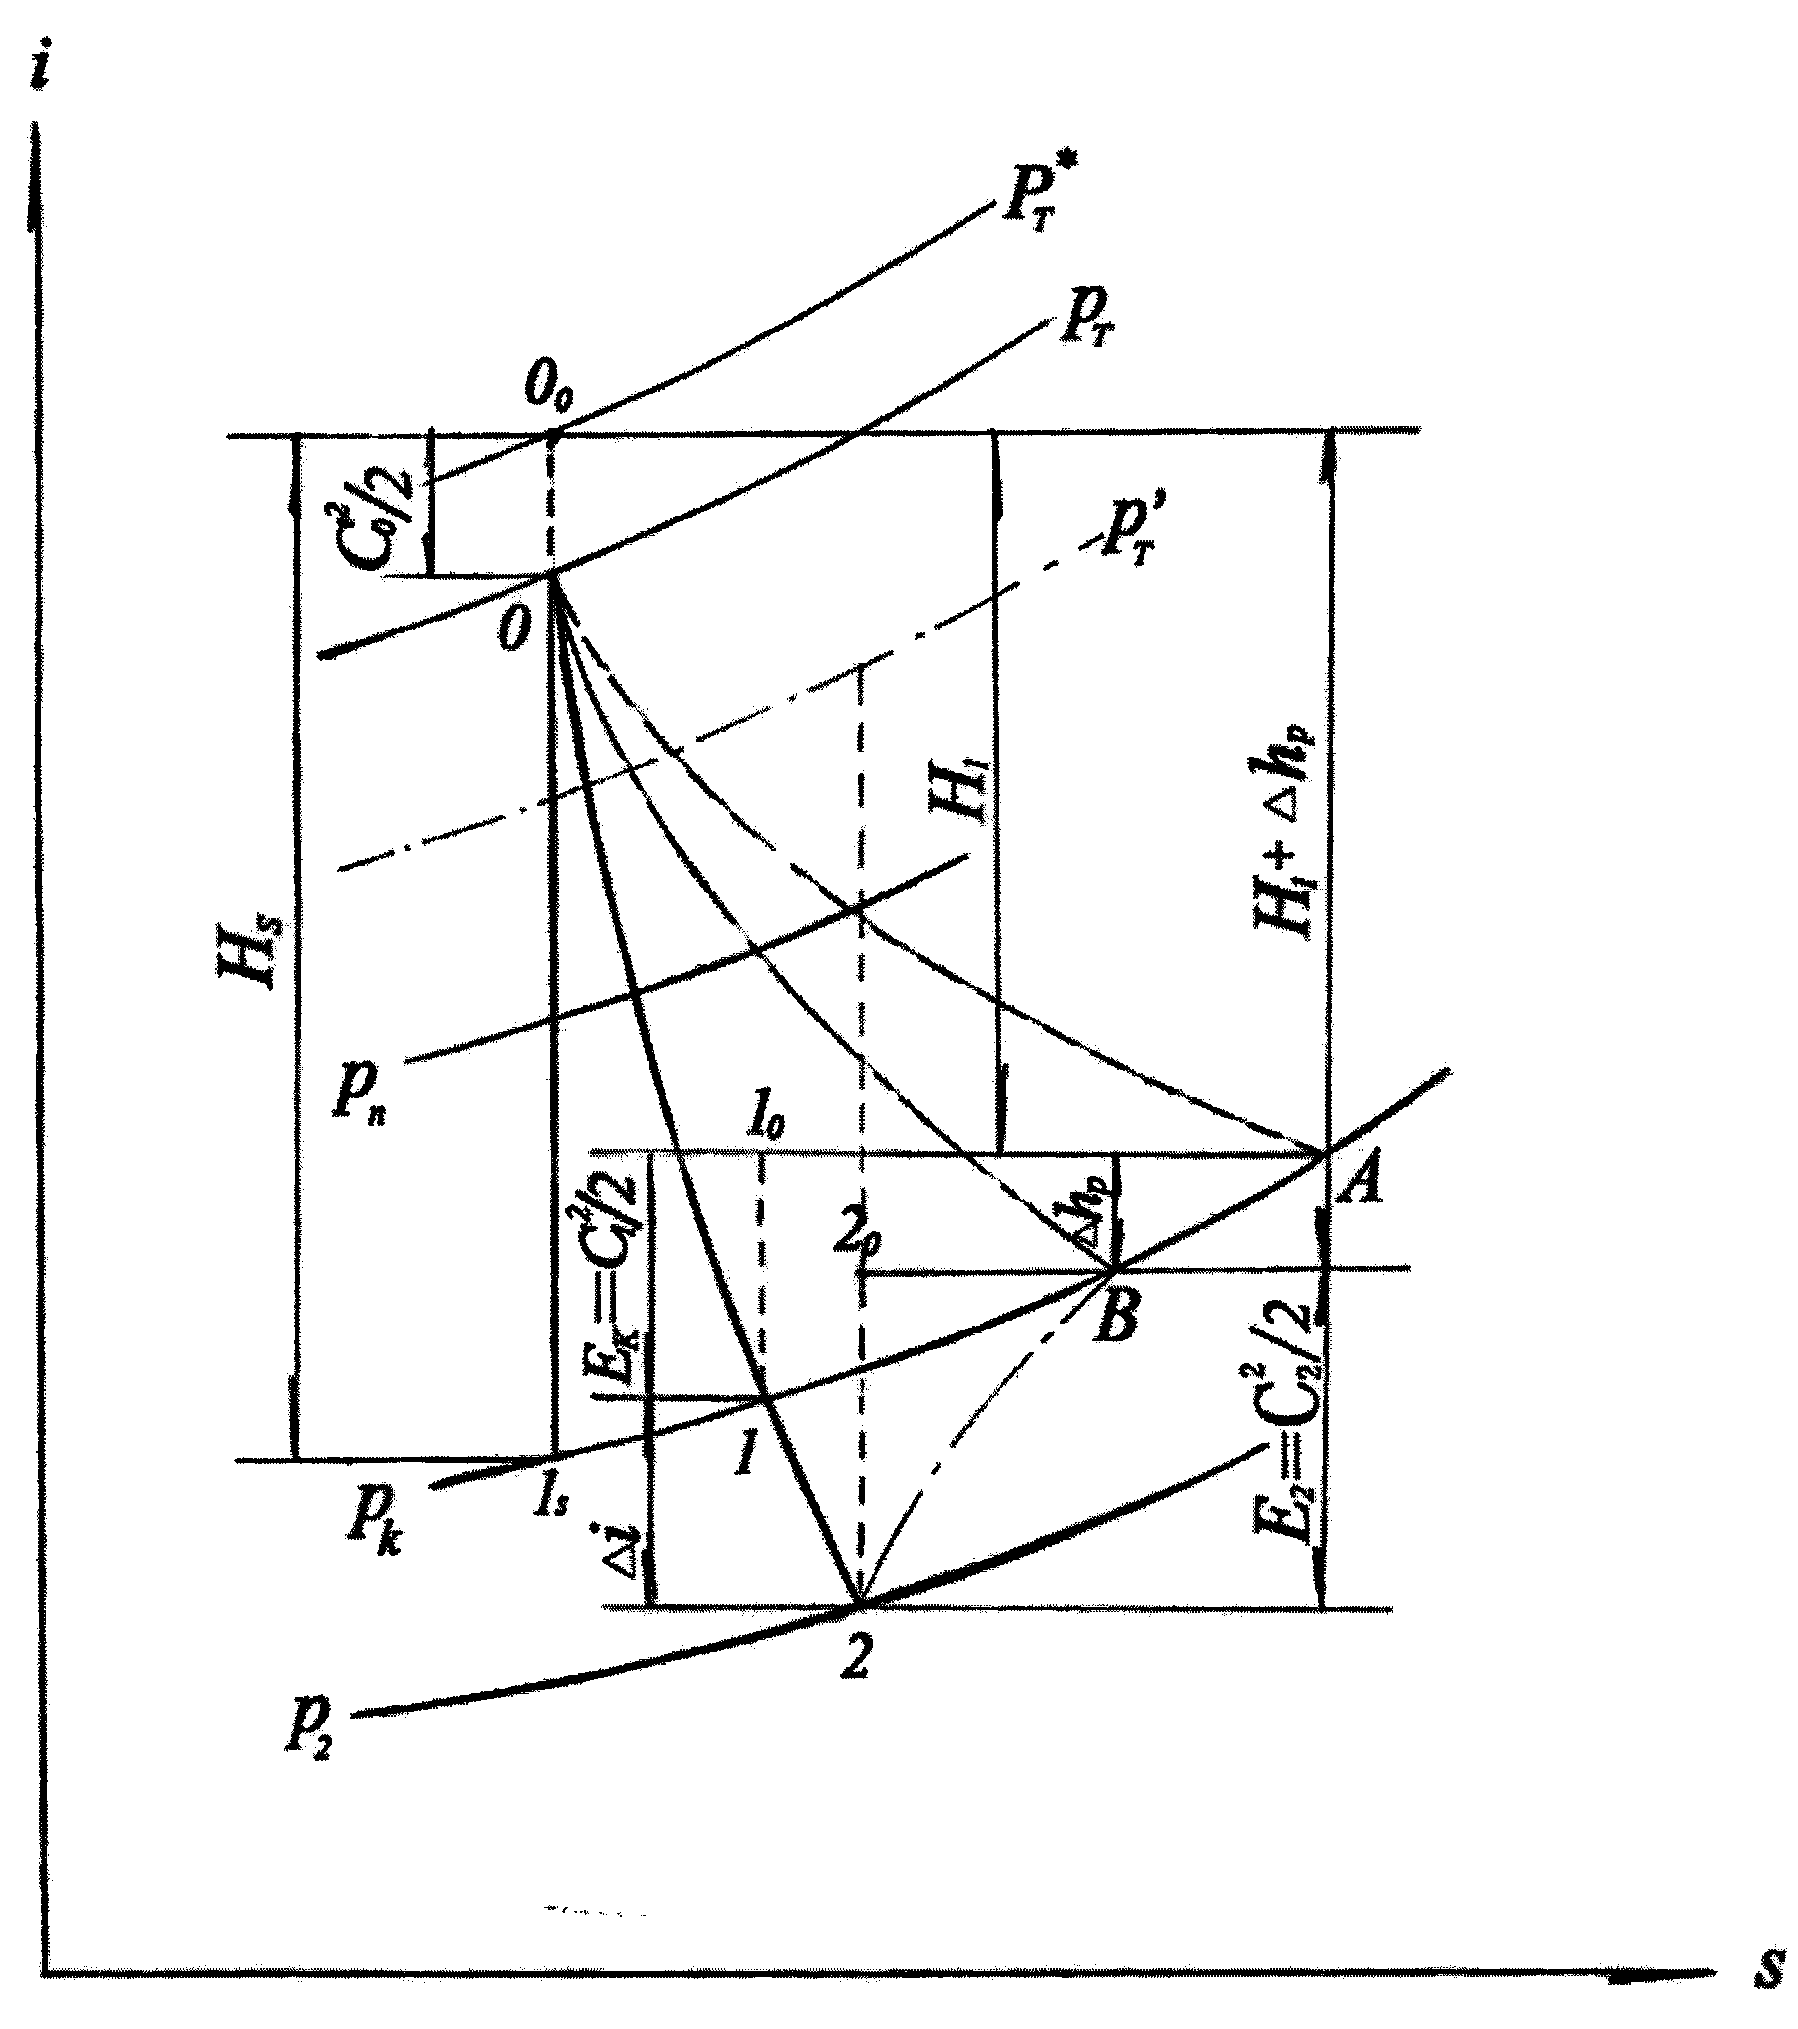 Exhaust by-pass valve for turbocharging system